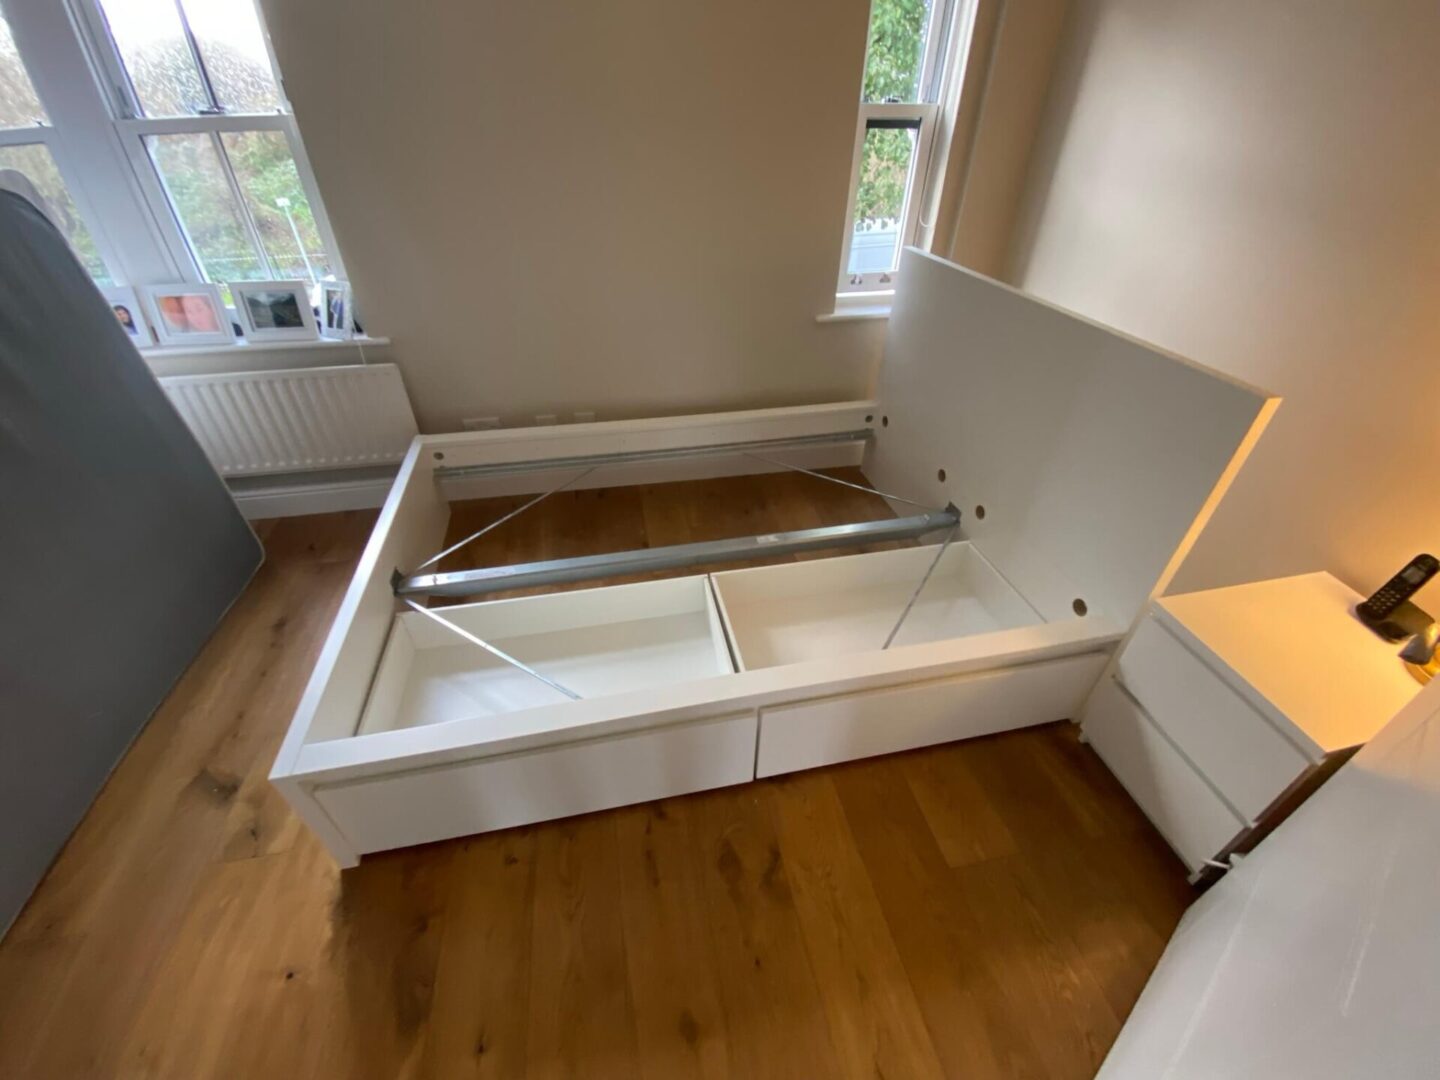 A bed frame with drawers in the middle of it.